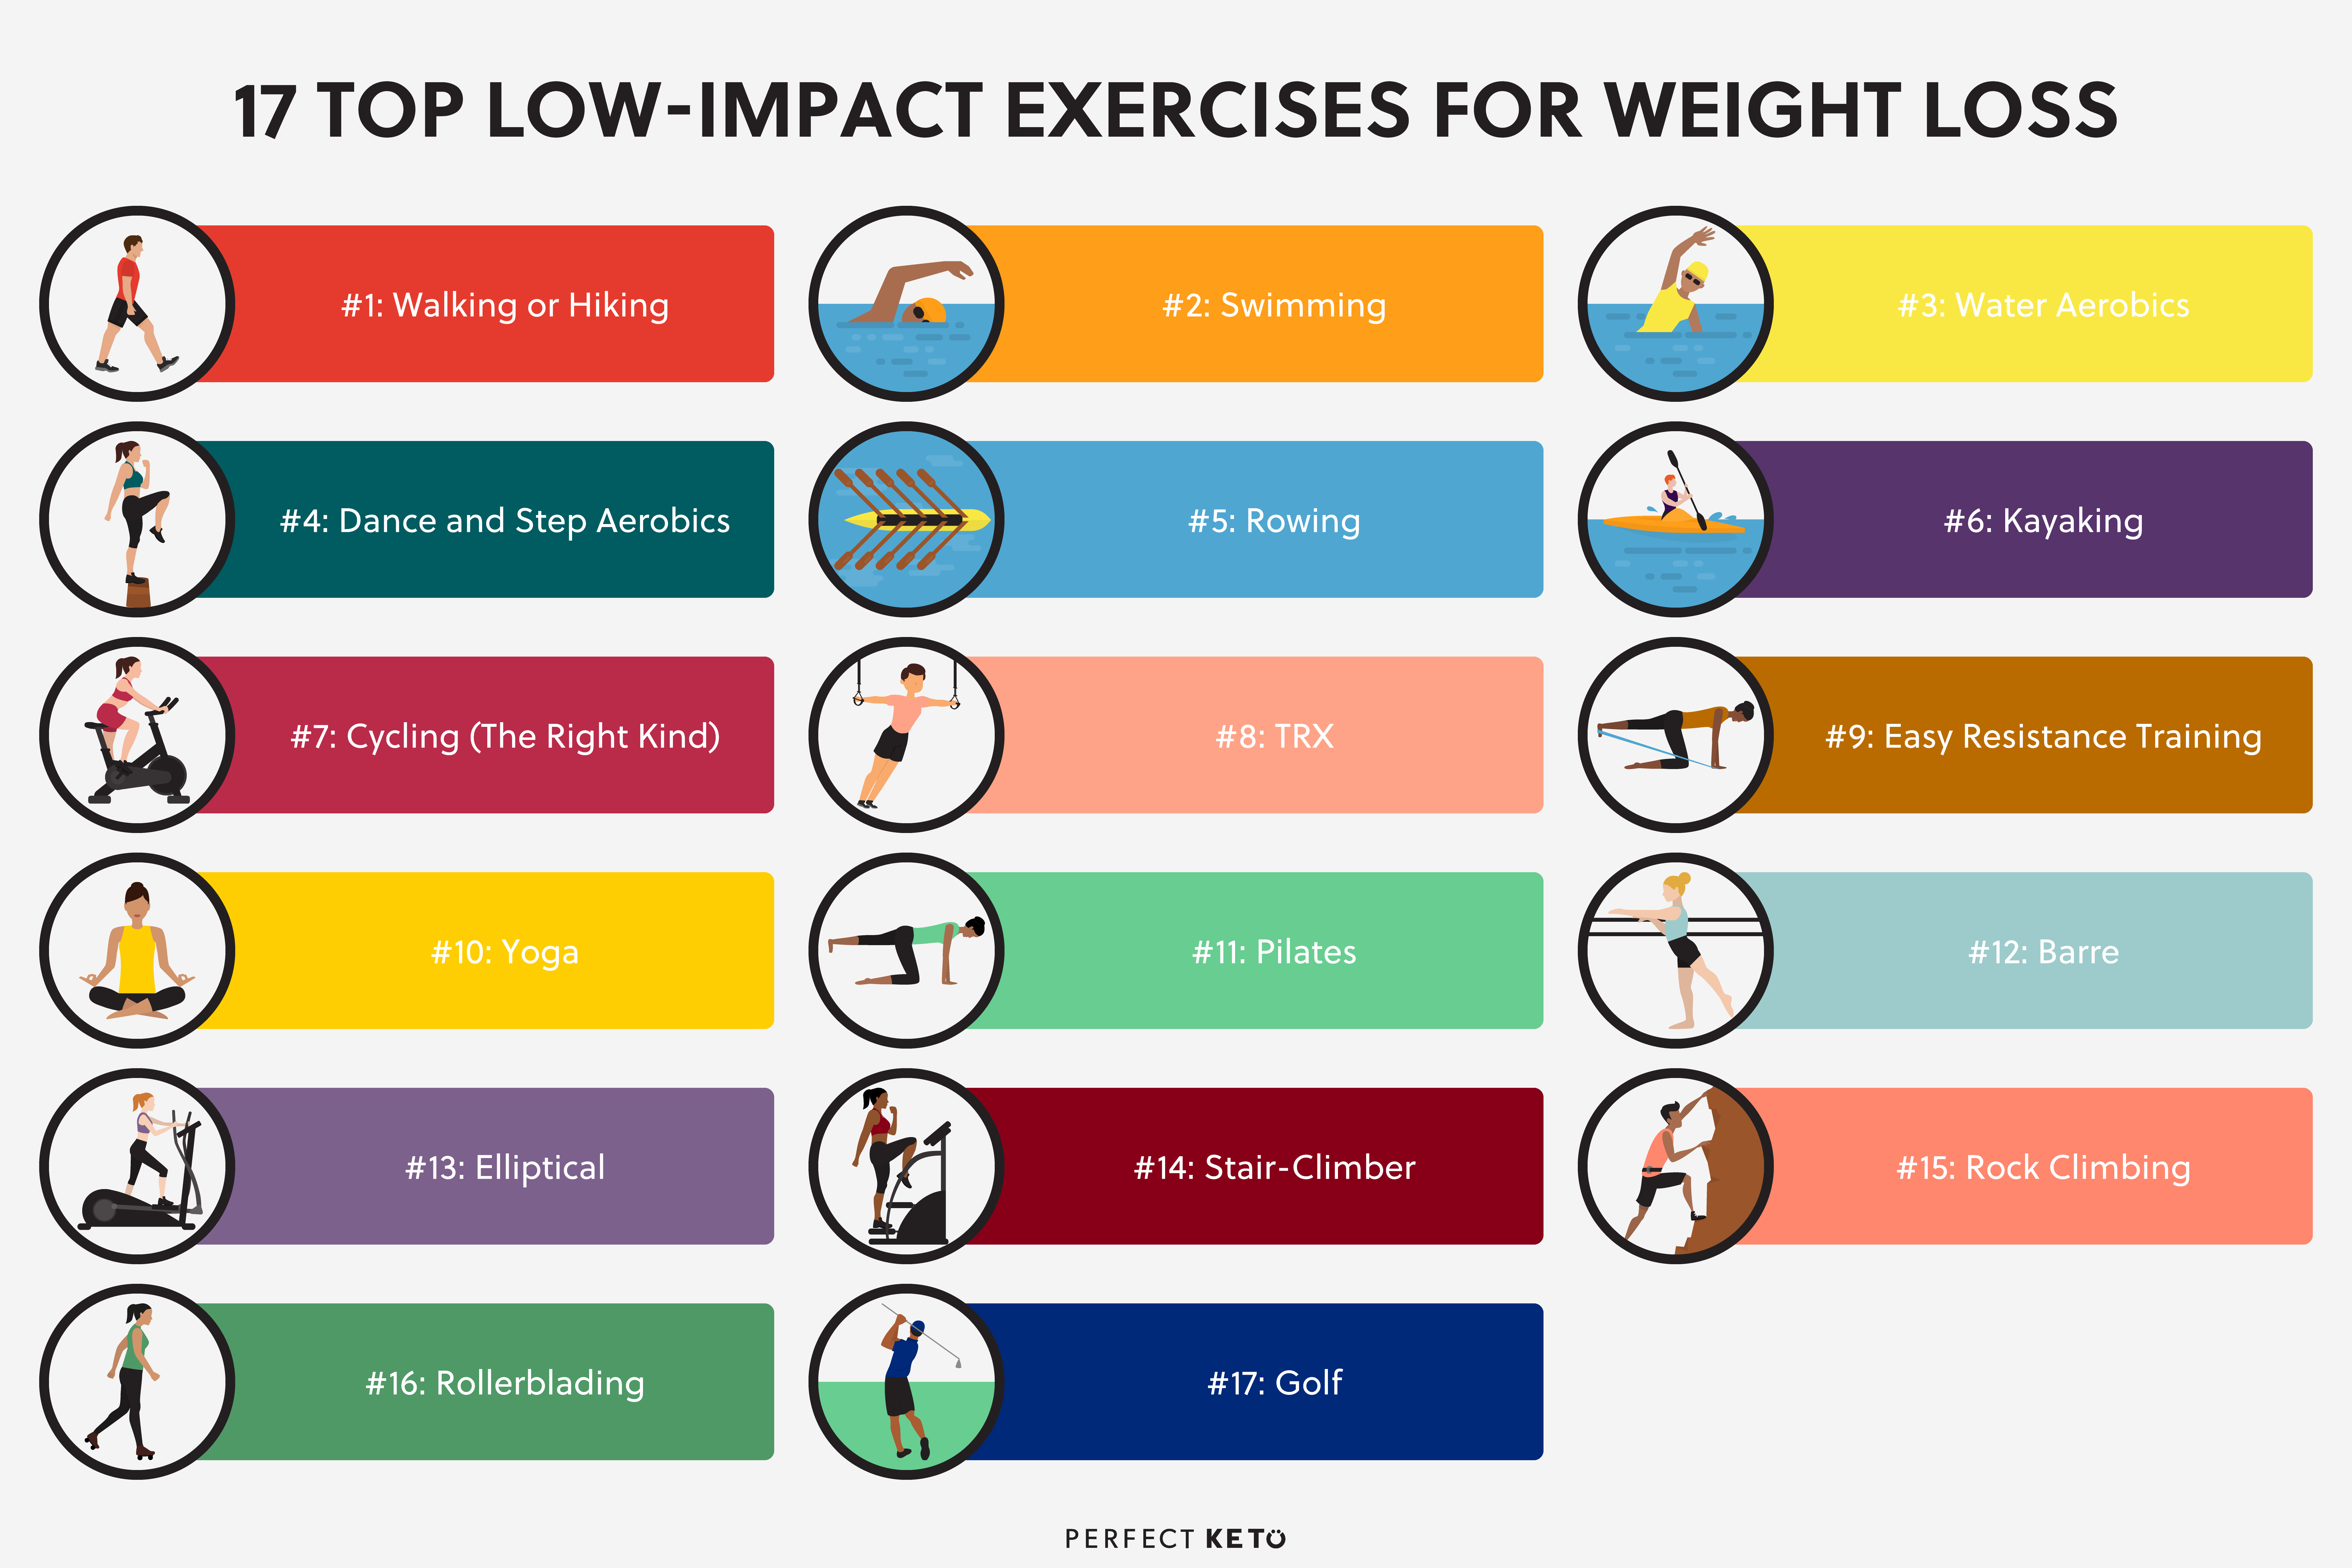 What Is a Low-Impact Workout?